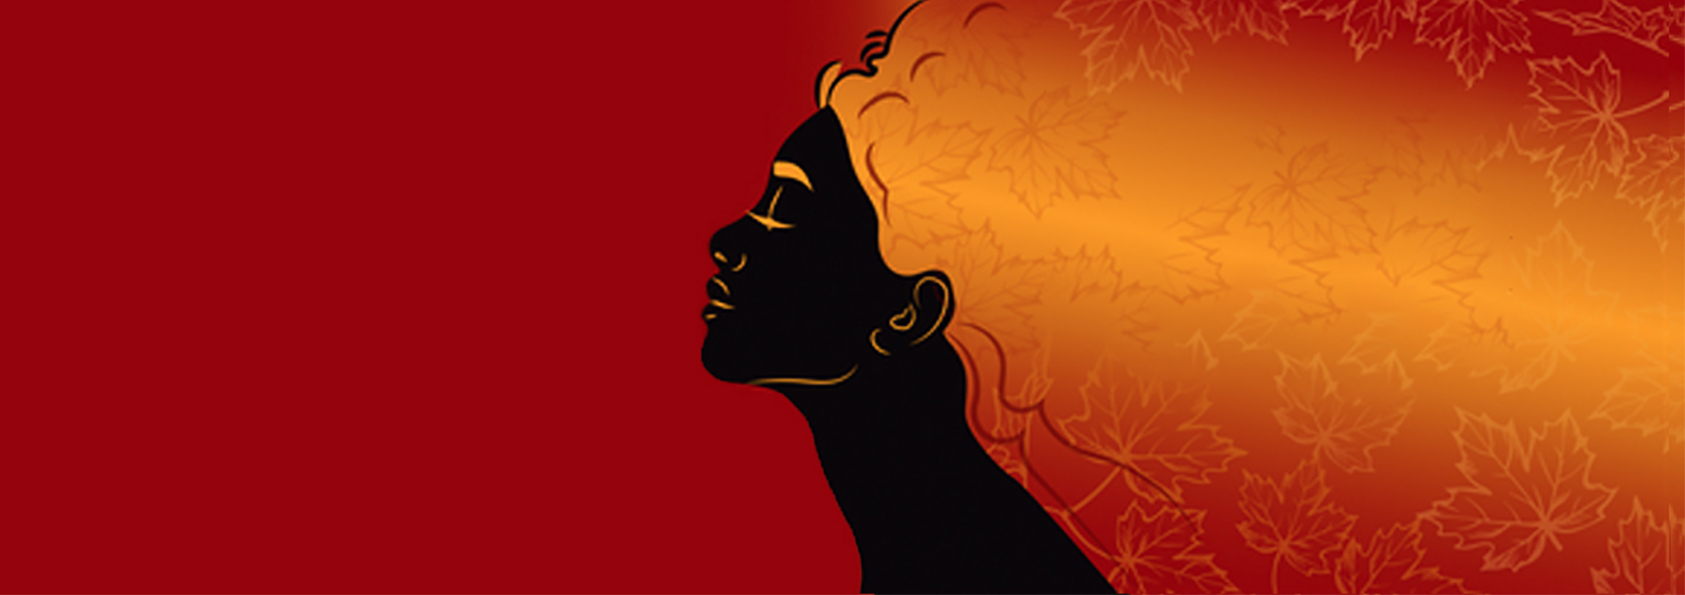 Animation of Black woman with gold and red hair made of leaves sit against a red background.